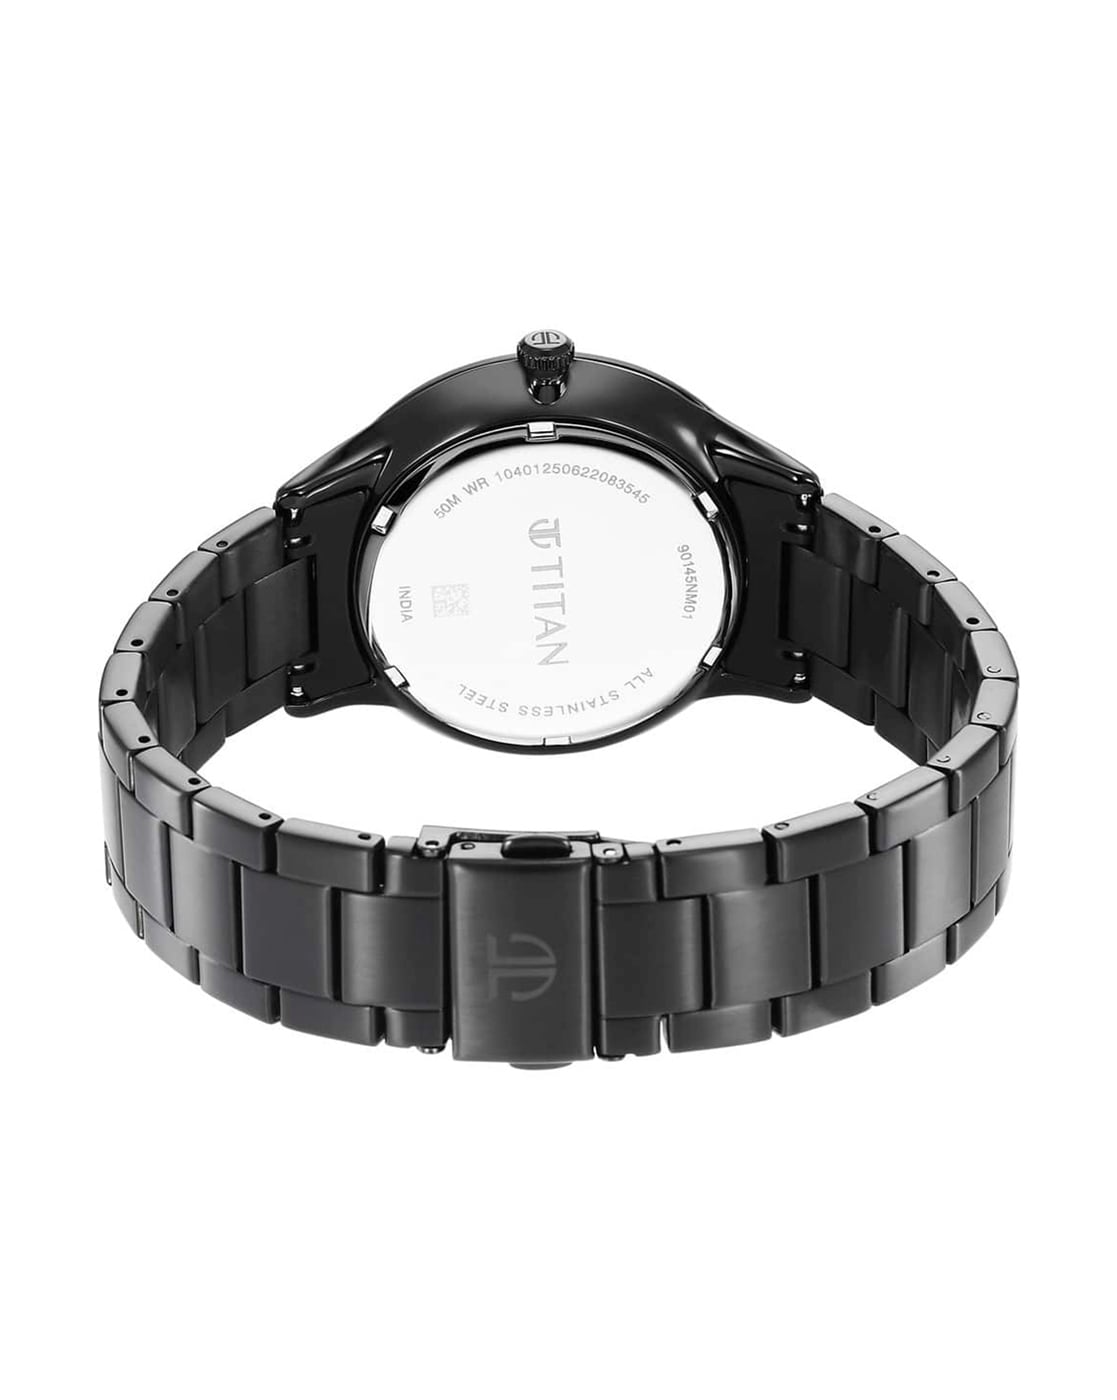 Buy Online Titan Black Dial World Time with Date Stainless Steel